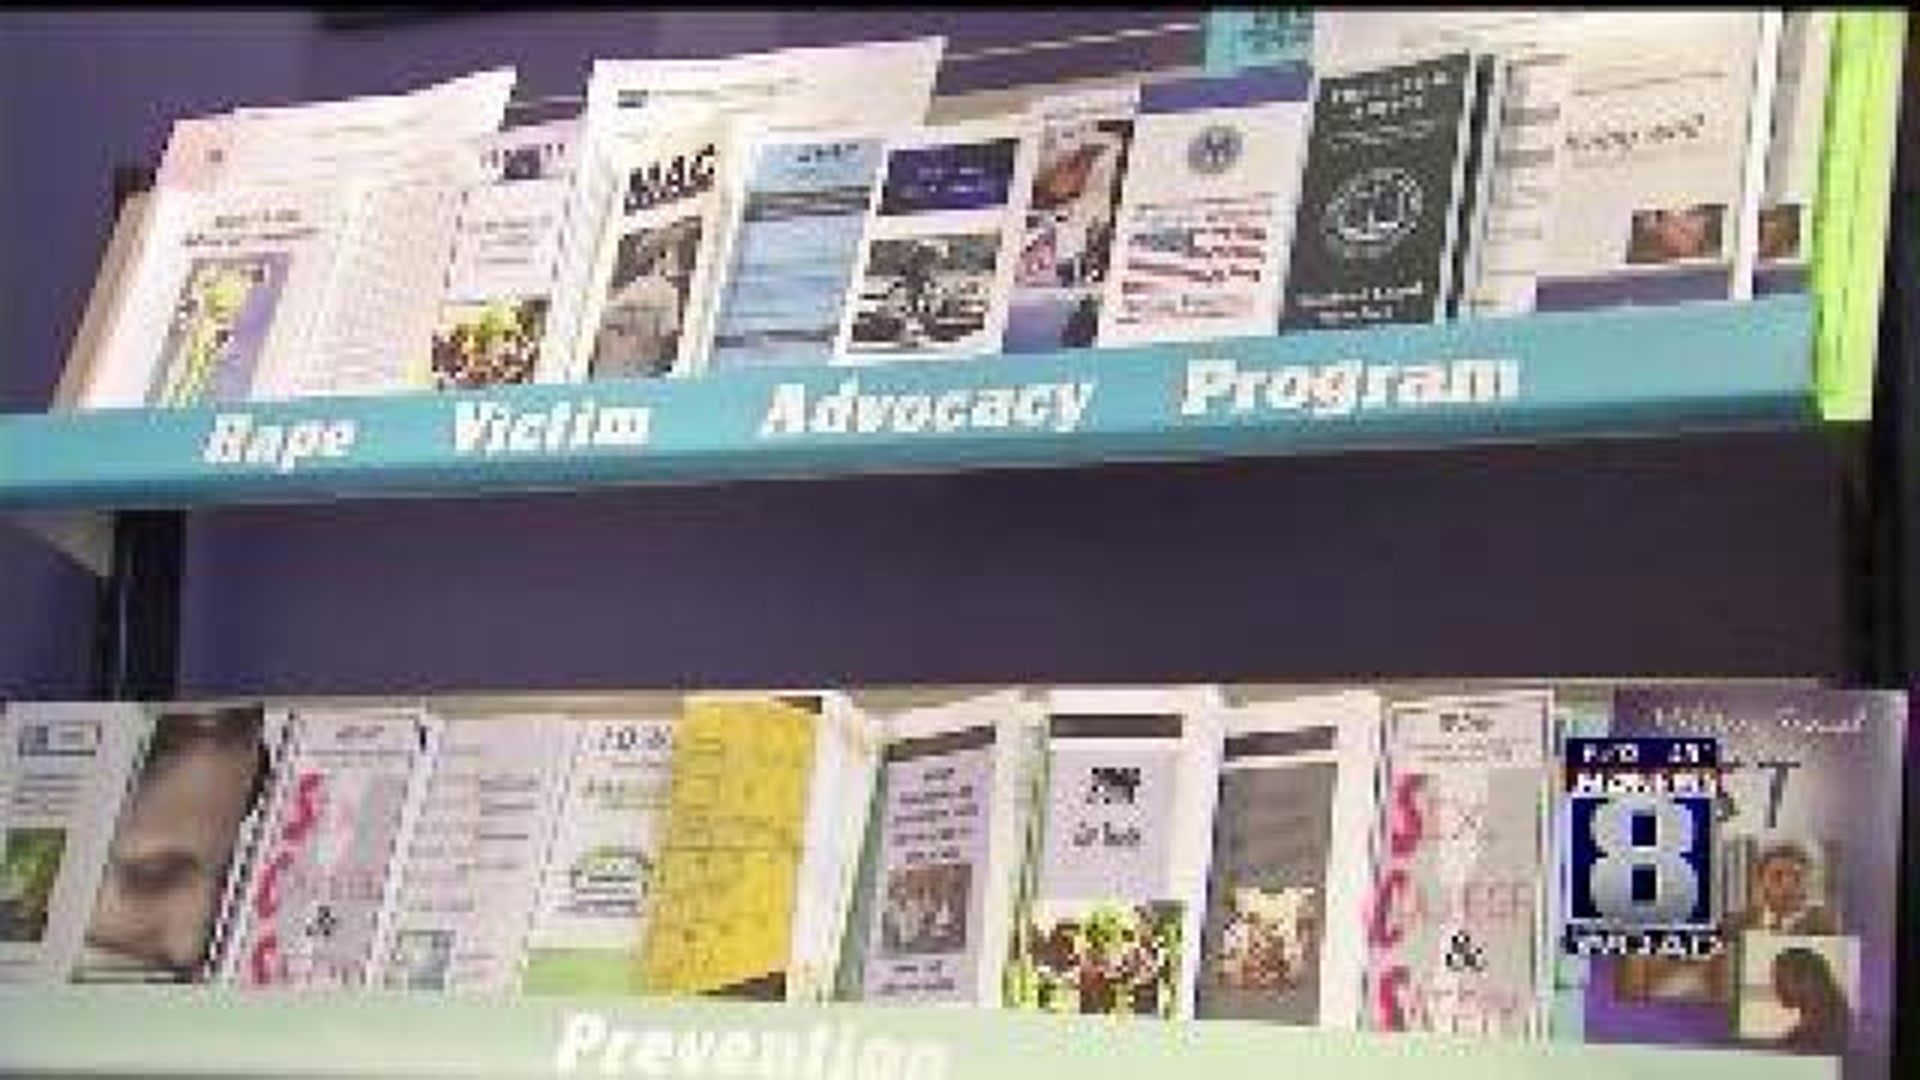 Statewide Paln Announced to Overhaul Crime Victim Services